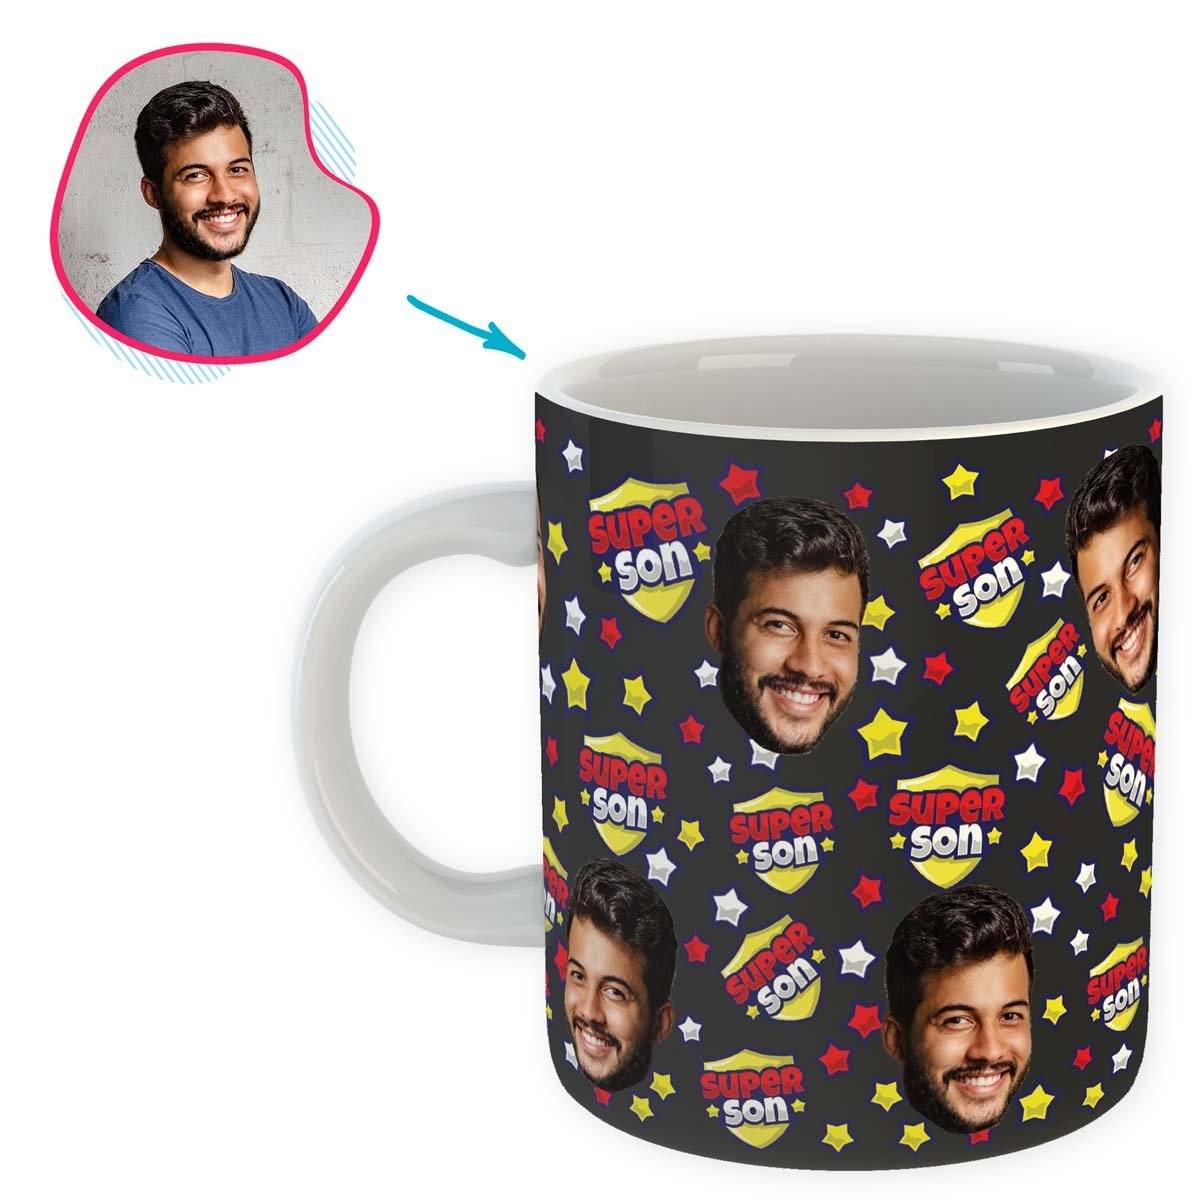 dark Super Son mug personalized with photo of face printed on it